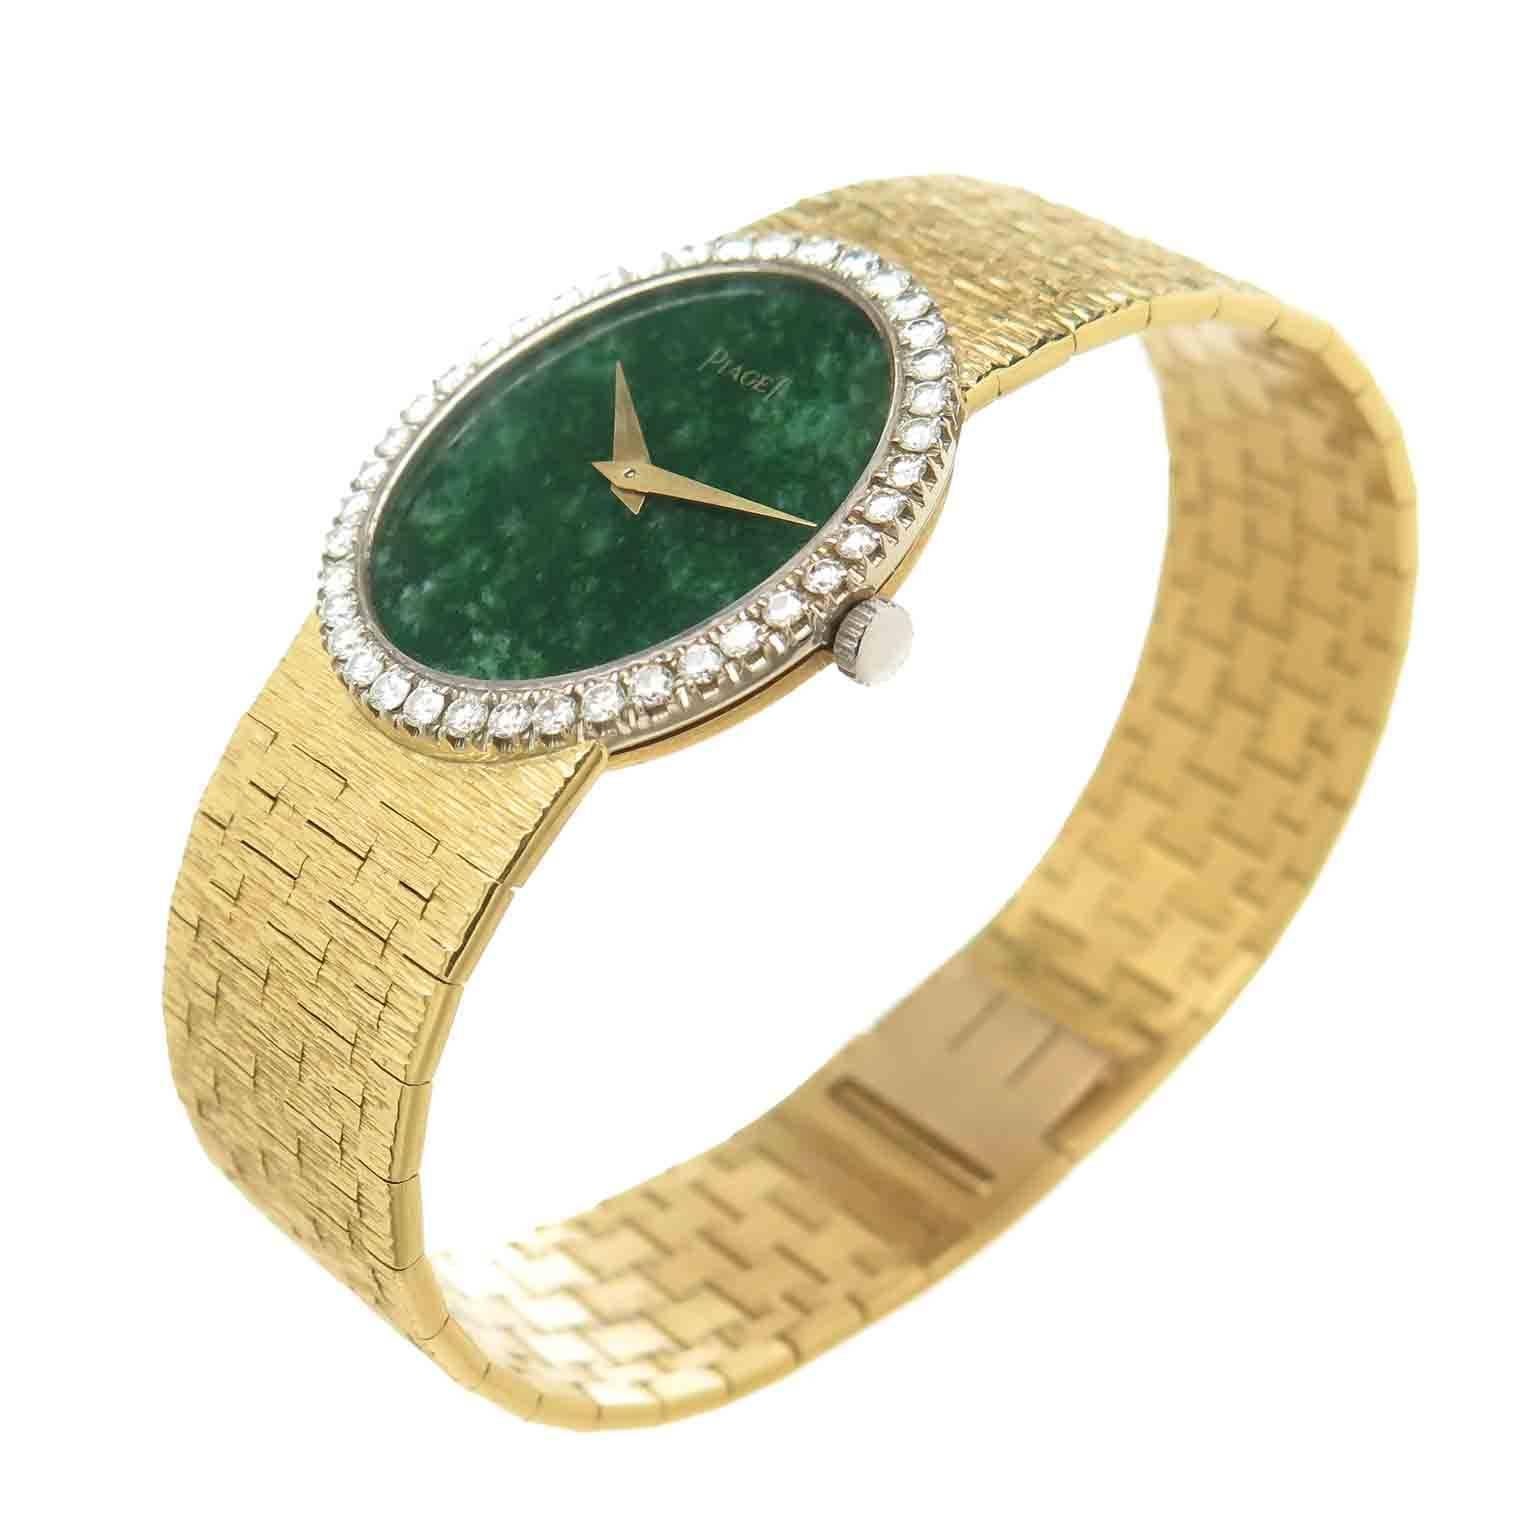 Circa 1980 Piaget 18K yellow Gold Ladies Wrist Watch. The oval case measures 27 X 24 MM and is 5 MM thick. Factory White gold Bezel set with fine White Round Brilliant cut Diamonds totaling 1 Carat. Mechanical, manual wind 17 Jewel Movement. Green